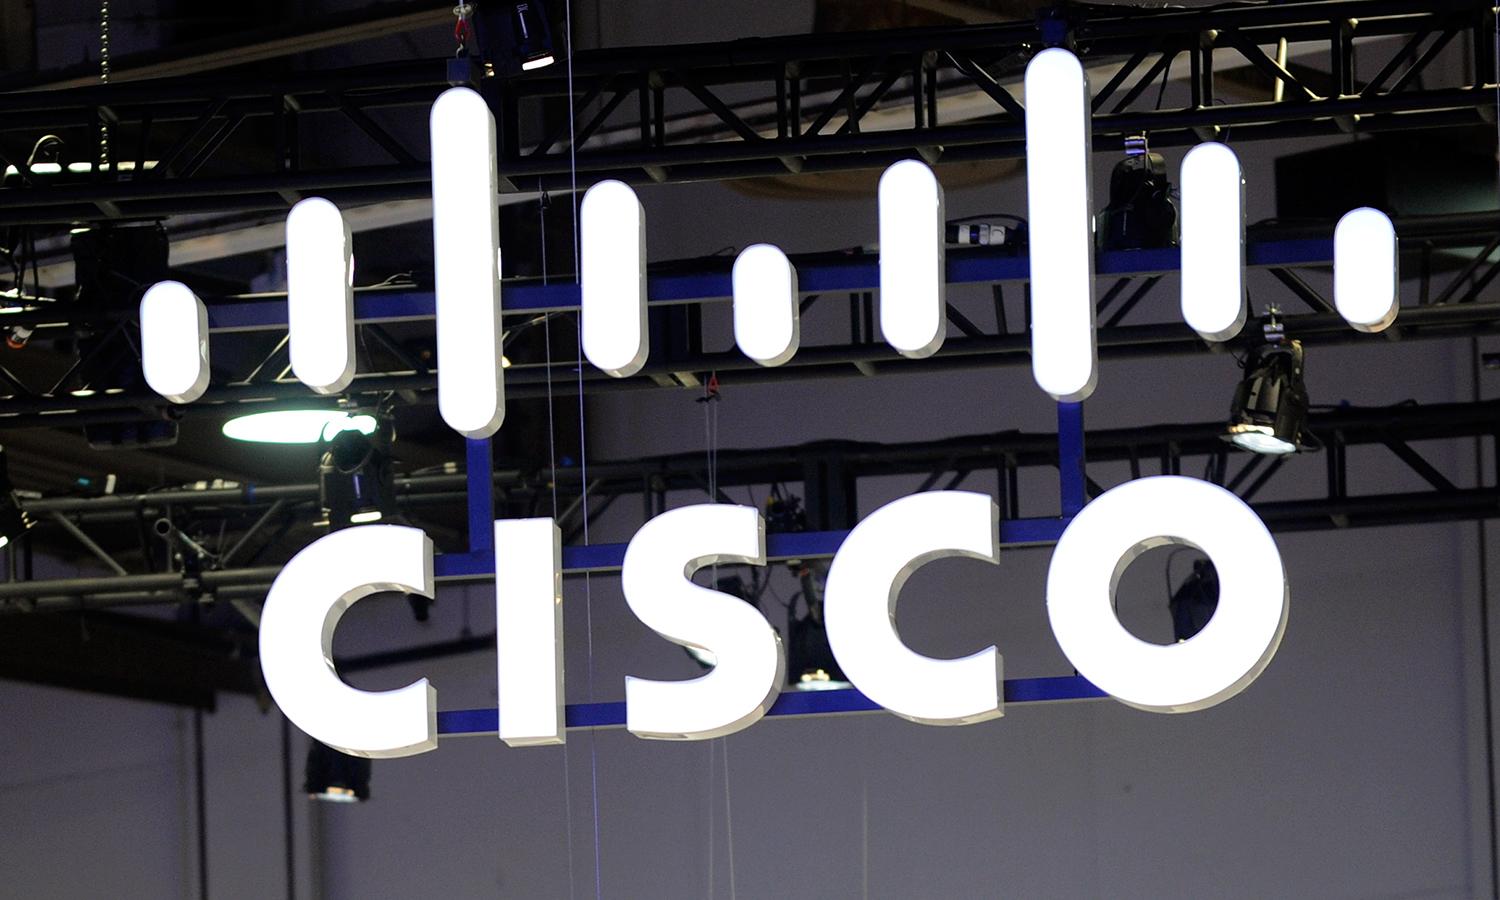 The Cisco logo is seen at the company's booth